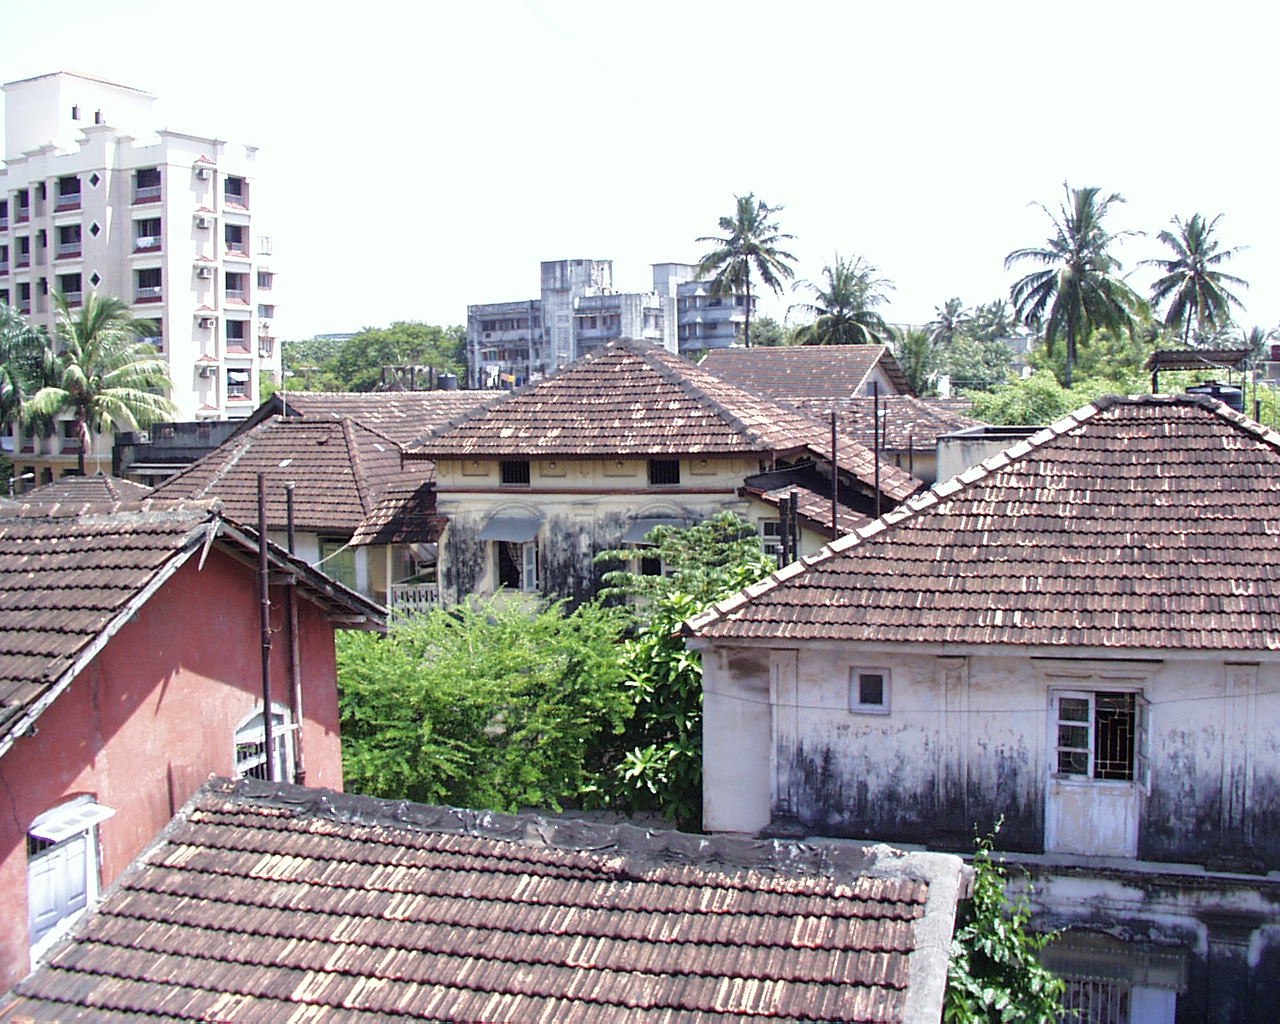 The villages gradually became congested because when there was a need for additional accommodation new houses were built on any open space in the village in a haphazard manner. Gradually tall buildings and chawls sprung up on the outskirts of a village. (A rooftop view of Ranwar Village)